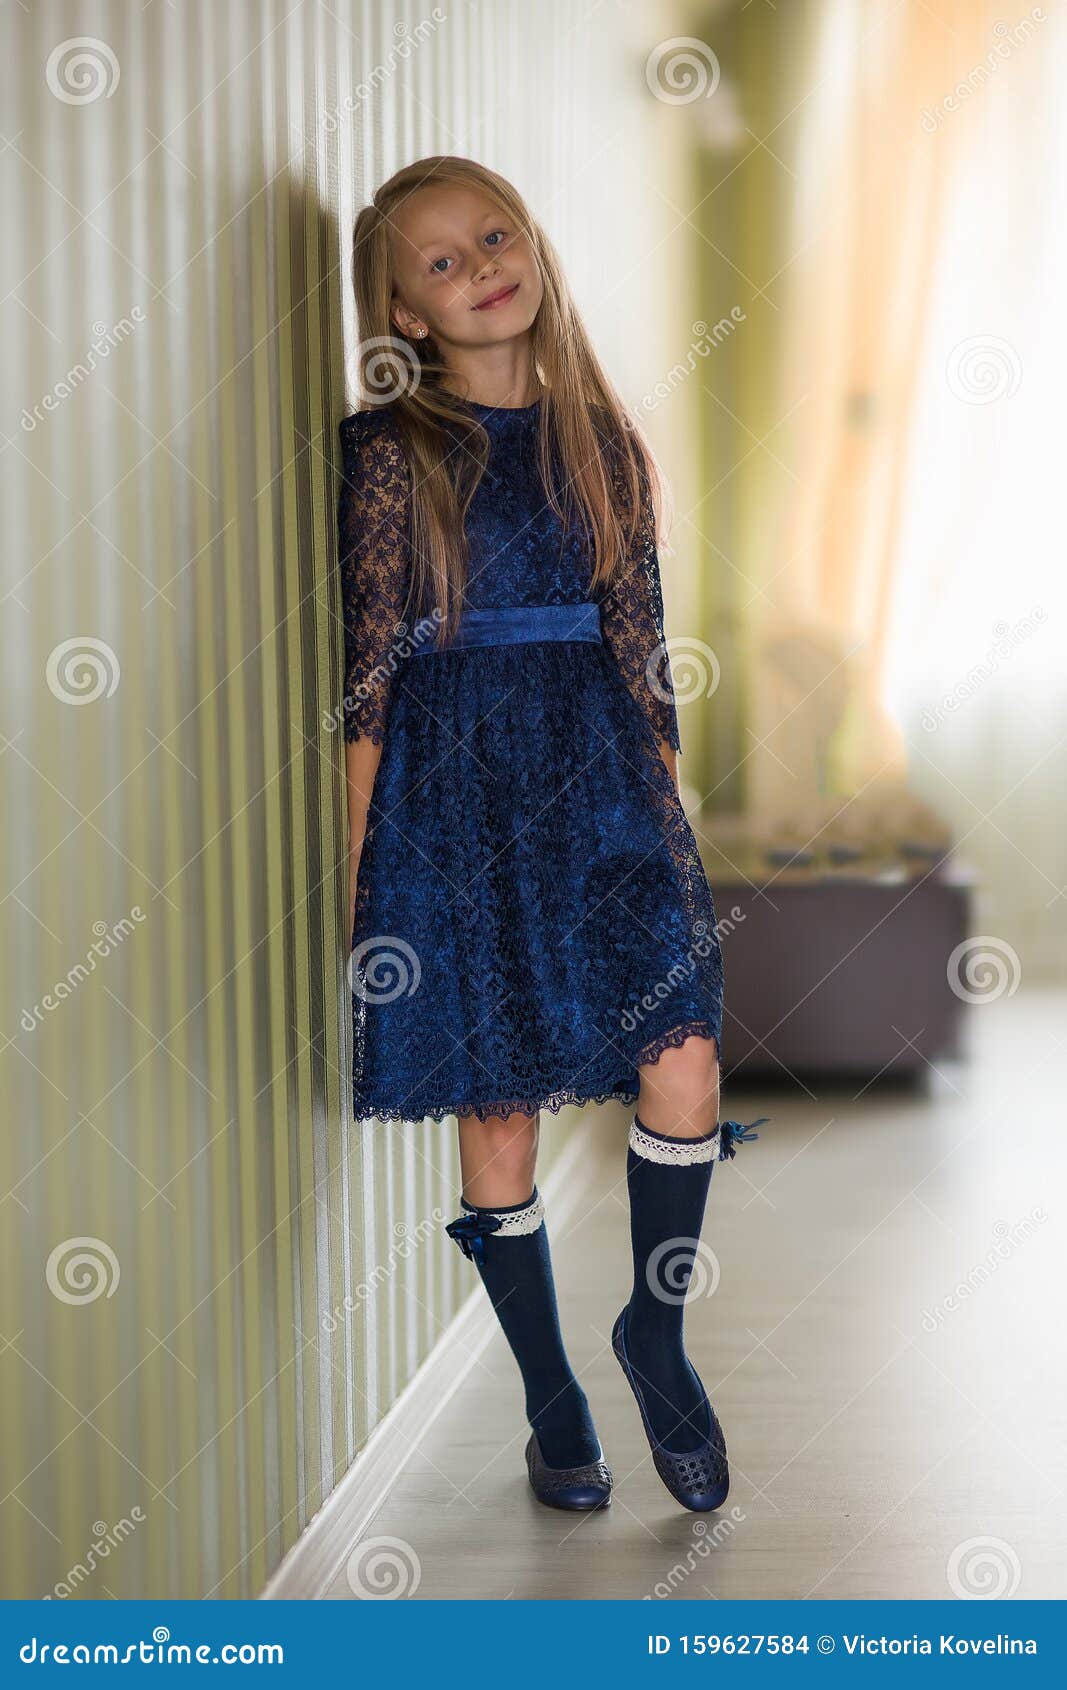 Fashionable Style of Clothes for Children. Little Little Girl Wearing a  Beautiful Lace Blue Dress. Girl Model with Long Hair Stock Photo - Image of  casual, fashionable: 159627584